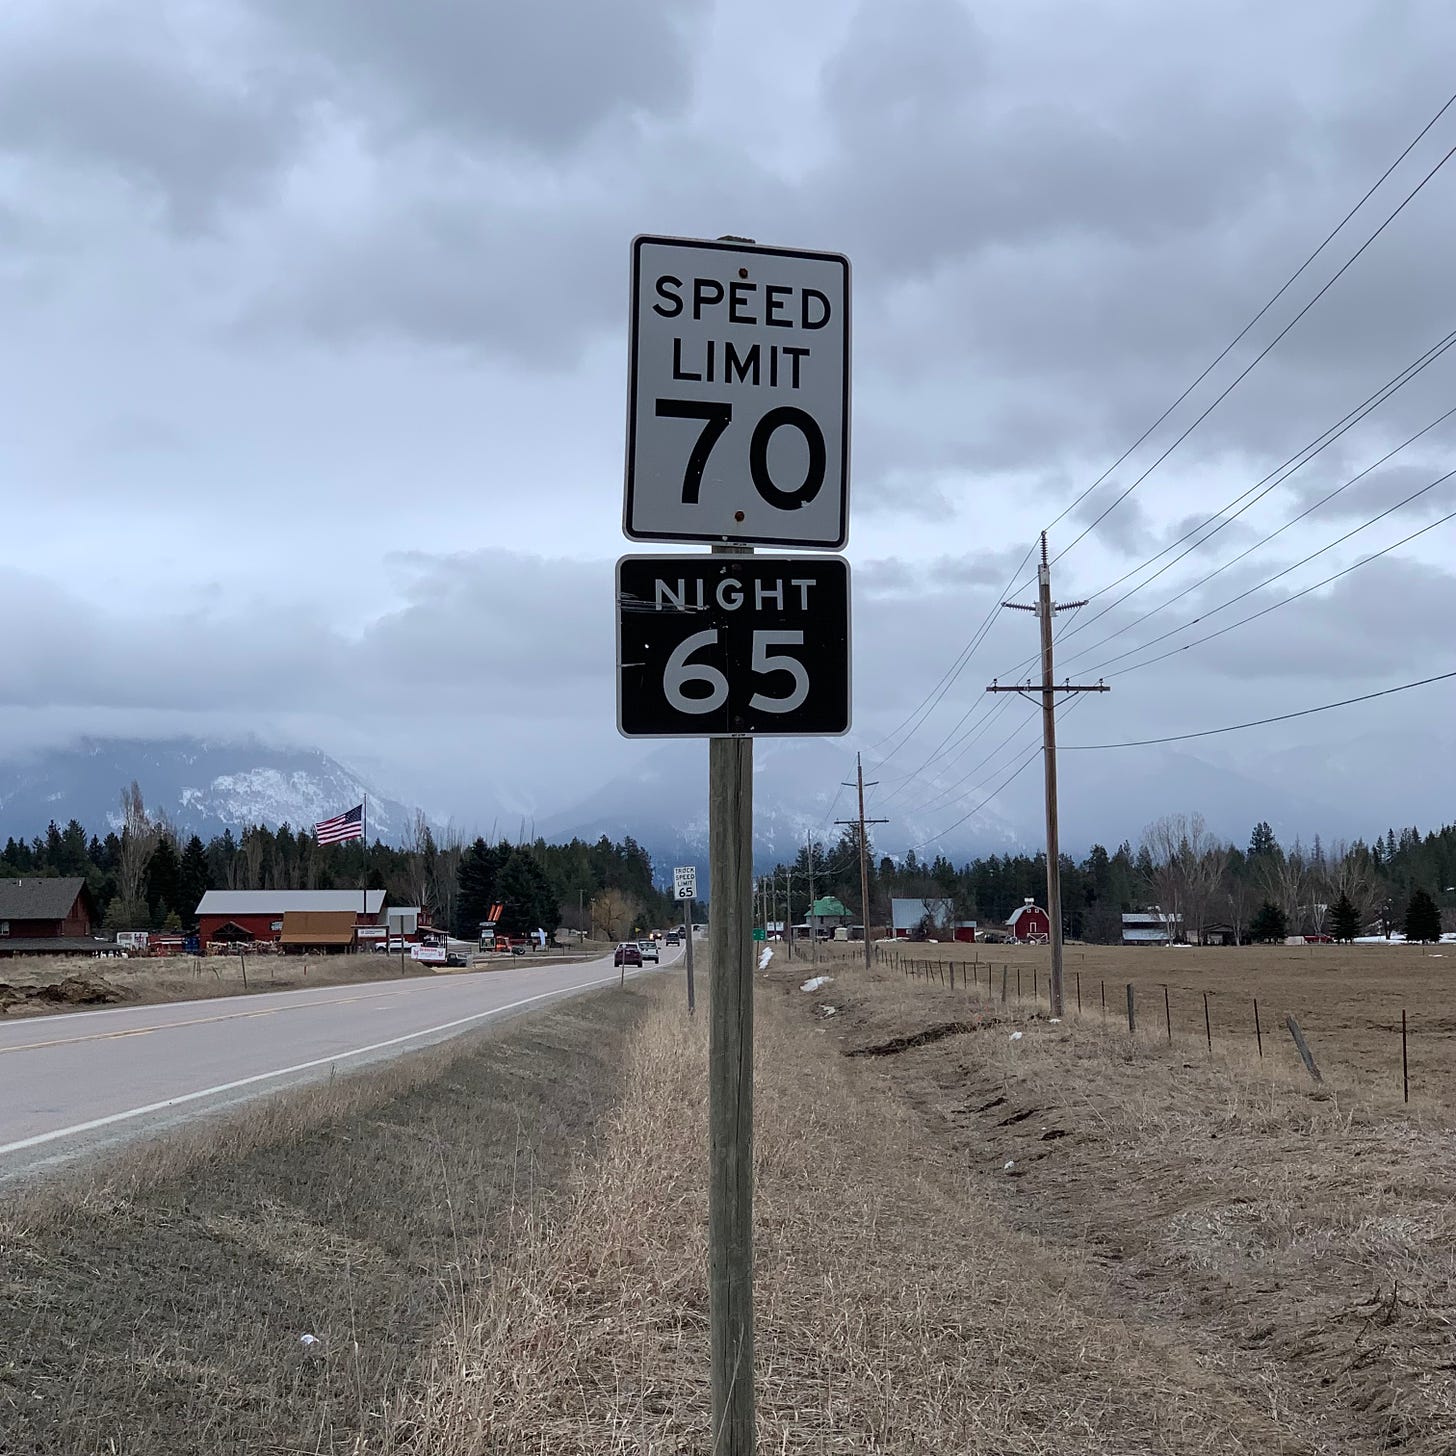 70 mph sign on a two-lane road